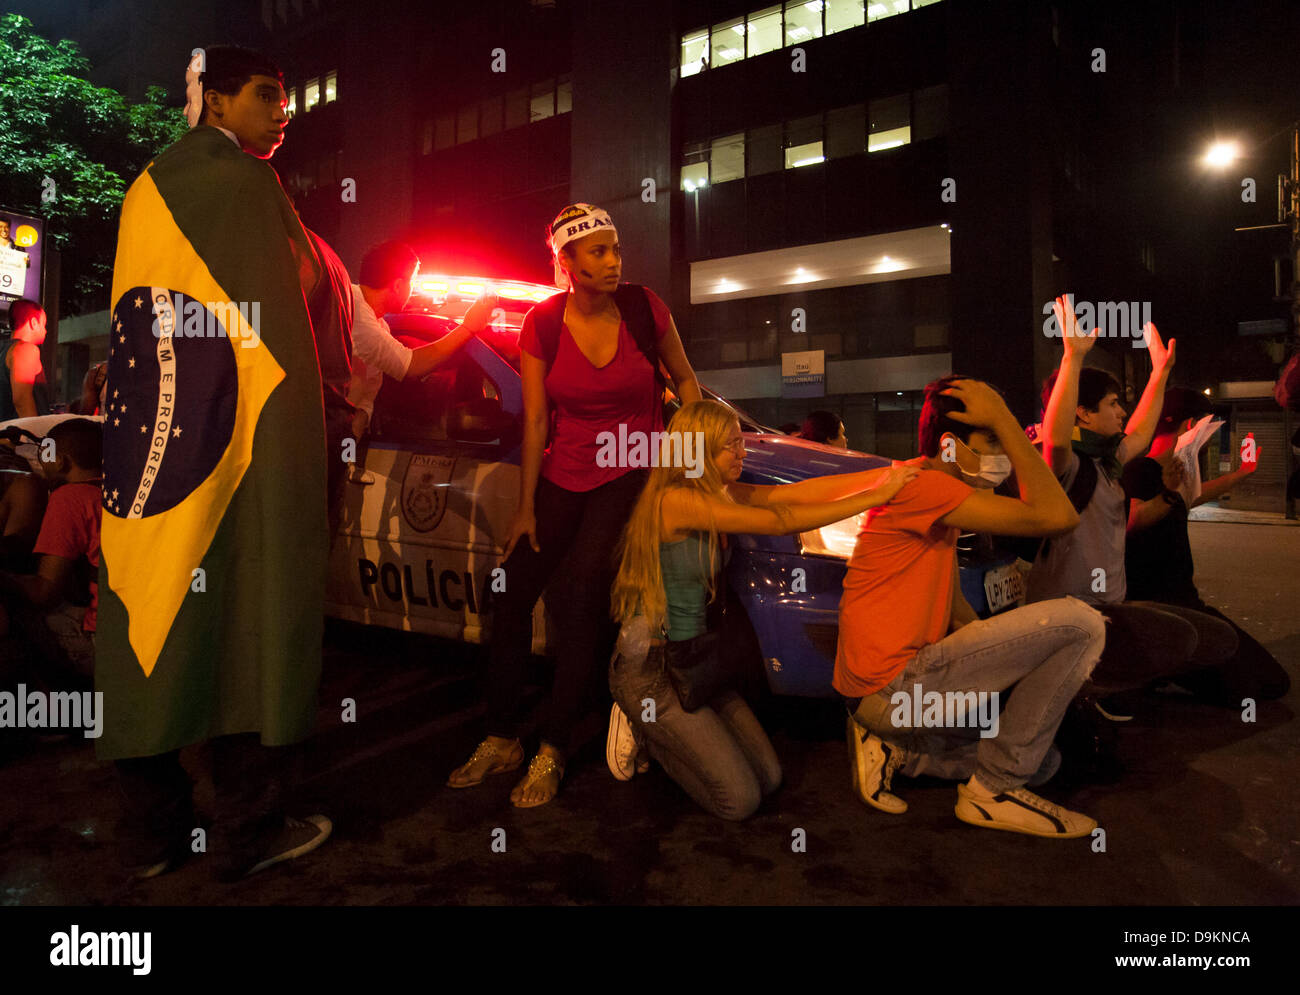 Rio de Janeiro, Brazil  20th June 2013. Frightened protesters shelter around a military police car in Avenida Rio Branco, as the ´Batalhão de Choque´, Riot Control Police´ pass by close by, after dispersing protesters using tear gas and rubber bullets in the centre of Rio de Janeiro, Brazil  20th June 2013 Credit:  Peter M. Wilson/Alamy Live News Stock Photo